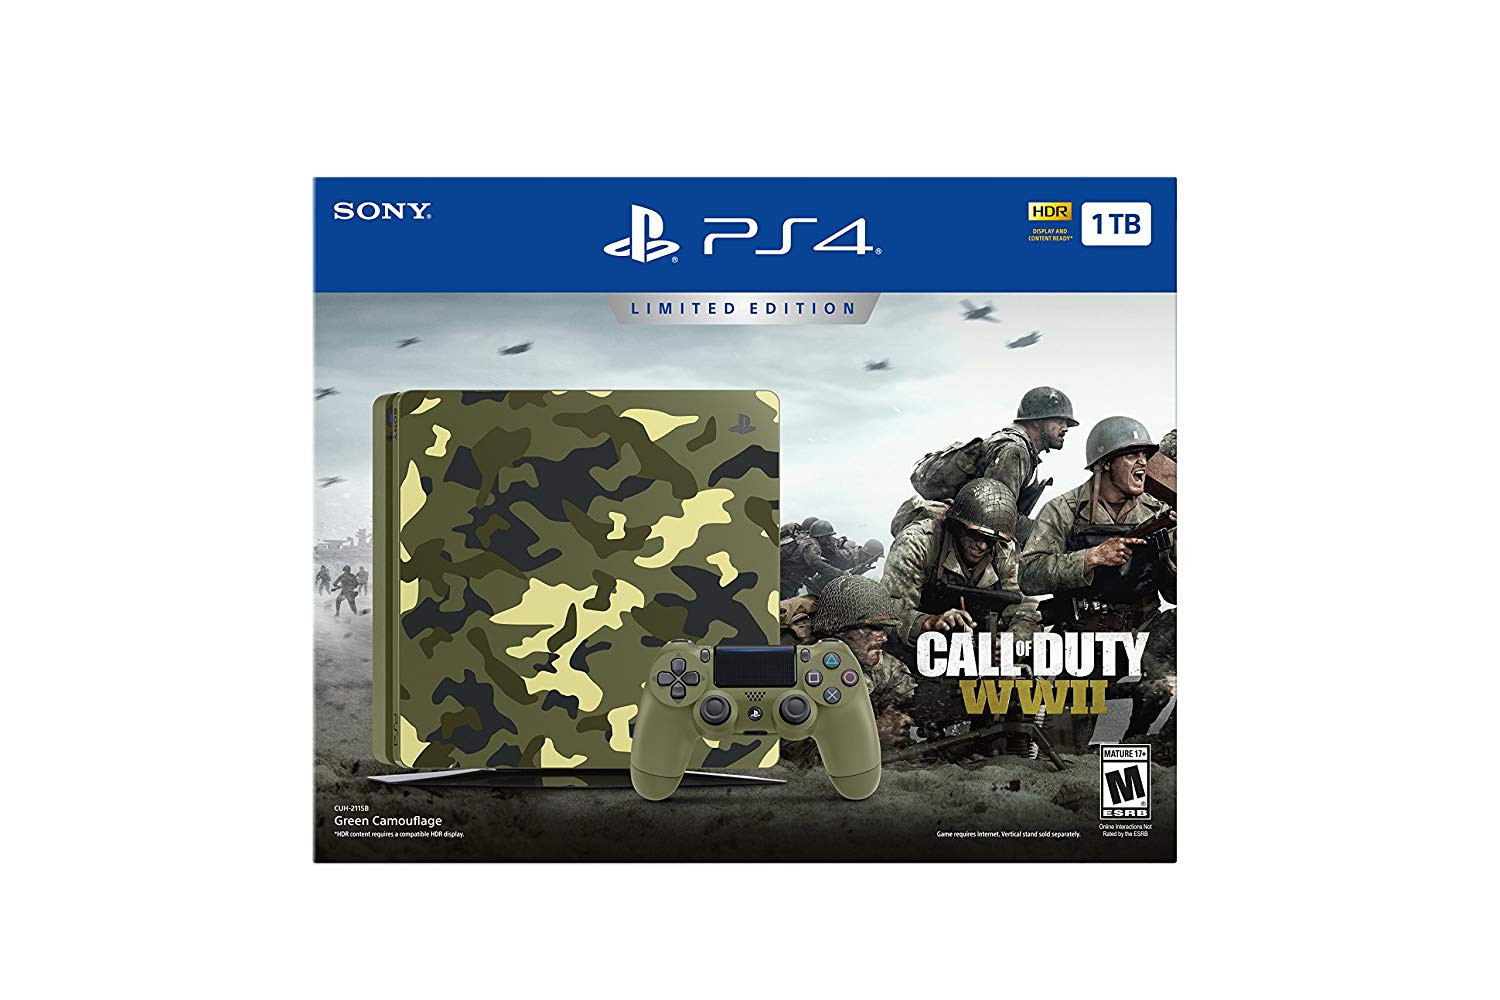 PlayStation 4 Slim 1TB Call of Duty WWII Limited Edition Console, Boxed